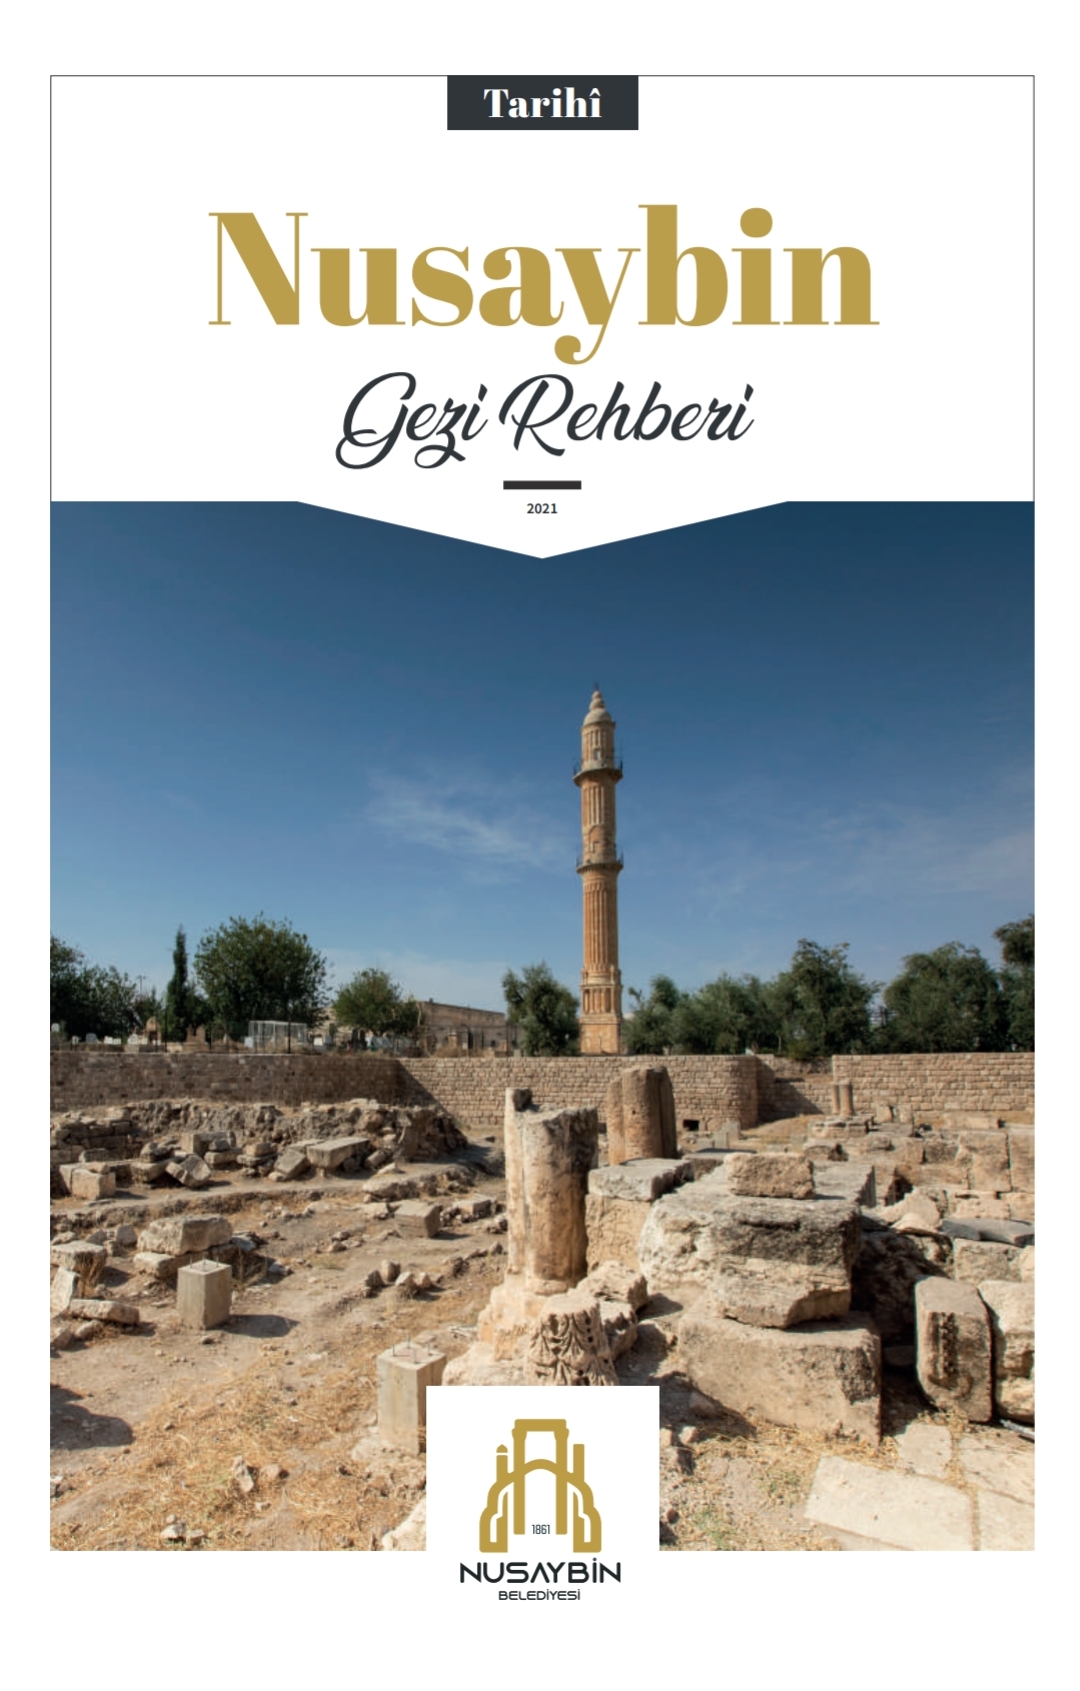 The City Guide of Historical Nusaybin